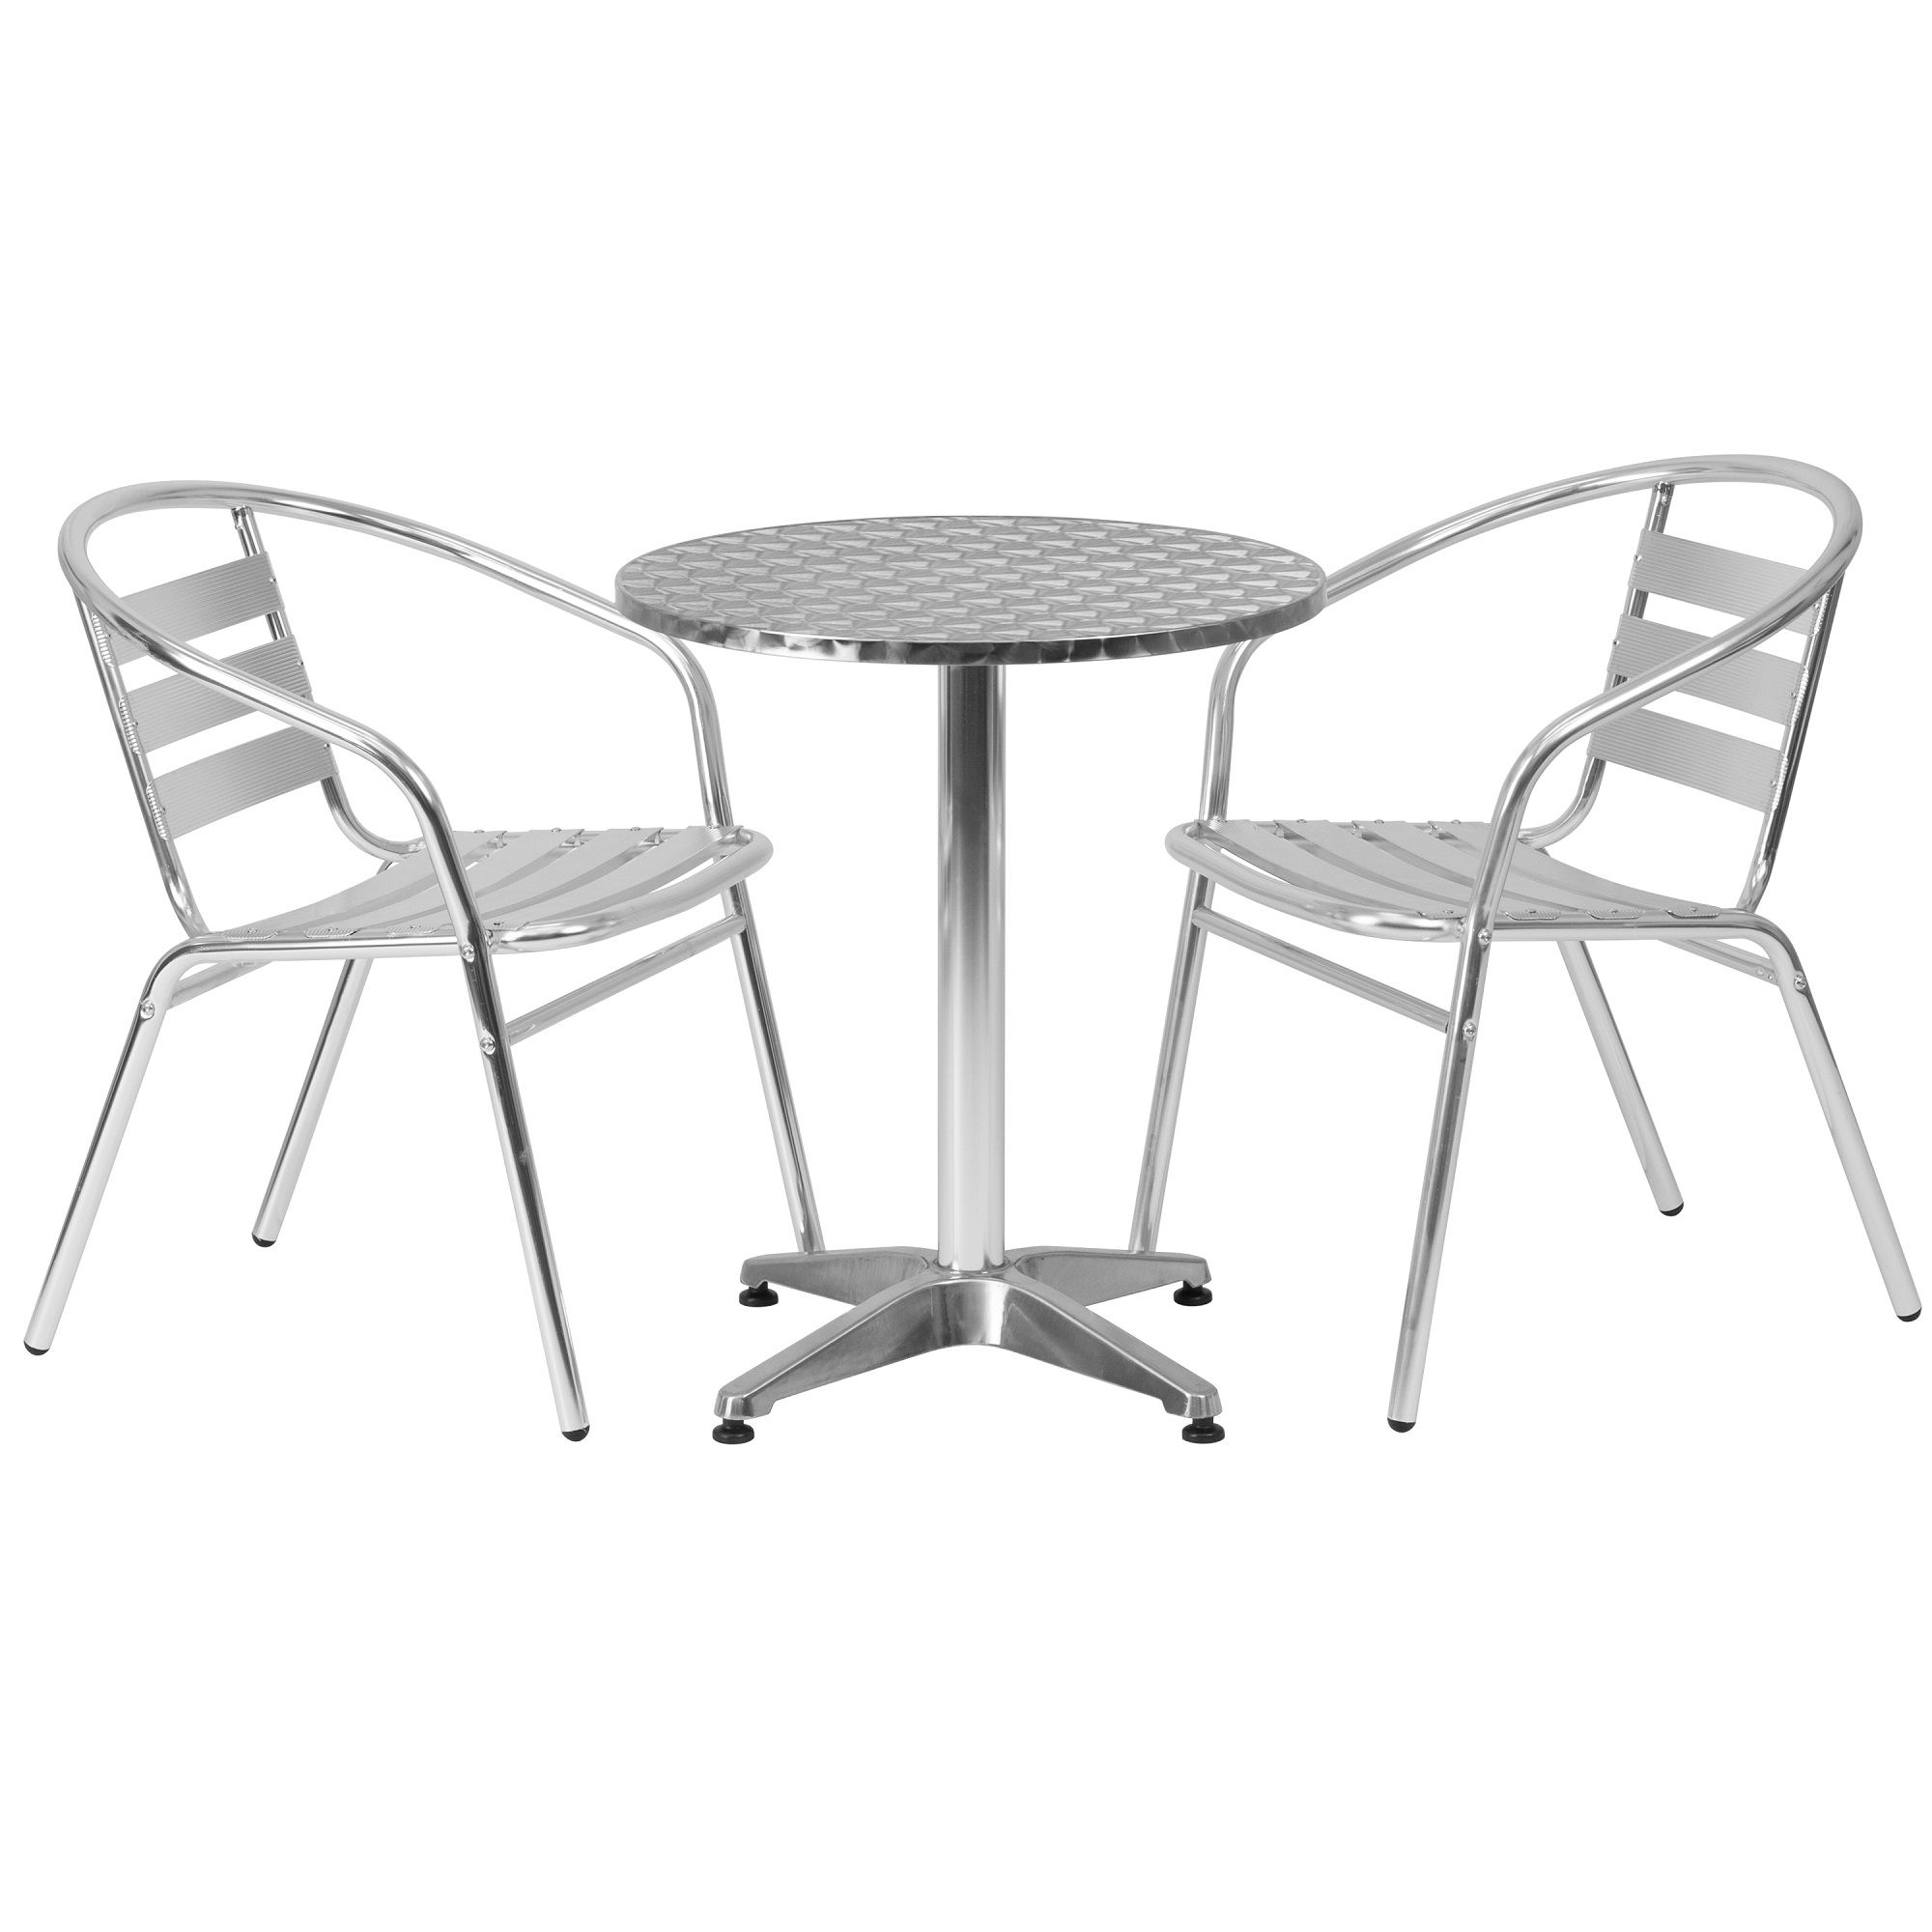 Preferred 3 Piece Silver Round Slat Back Outdoor Furniture Patio Table And Stack With Regard To 3 Piece Outdoor Table And Chair Sets (View 15 of 15)